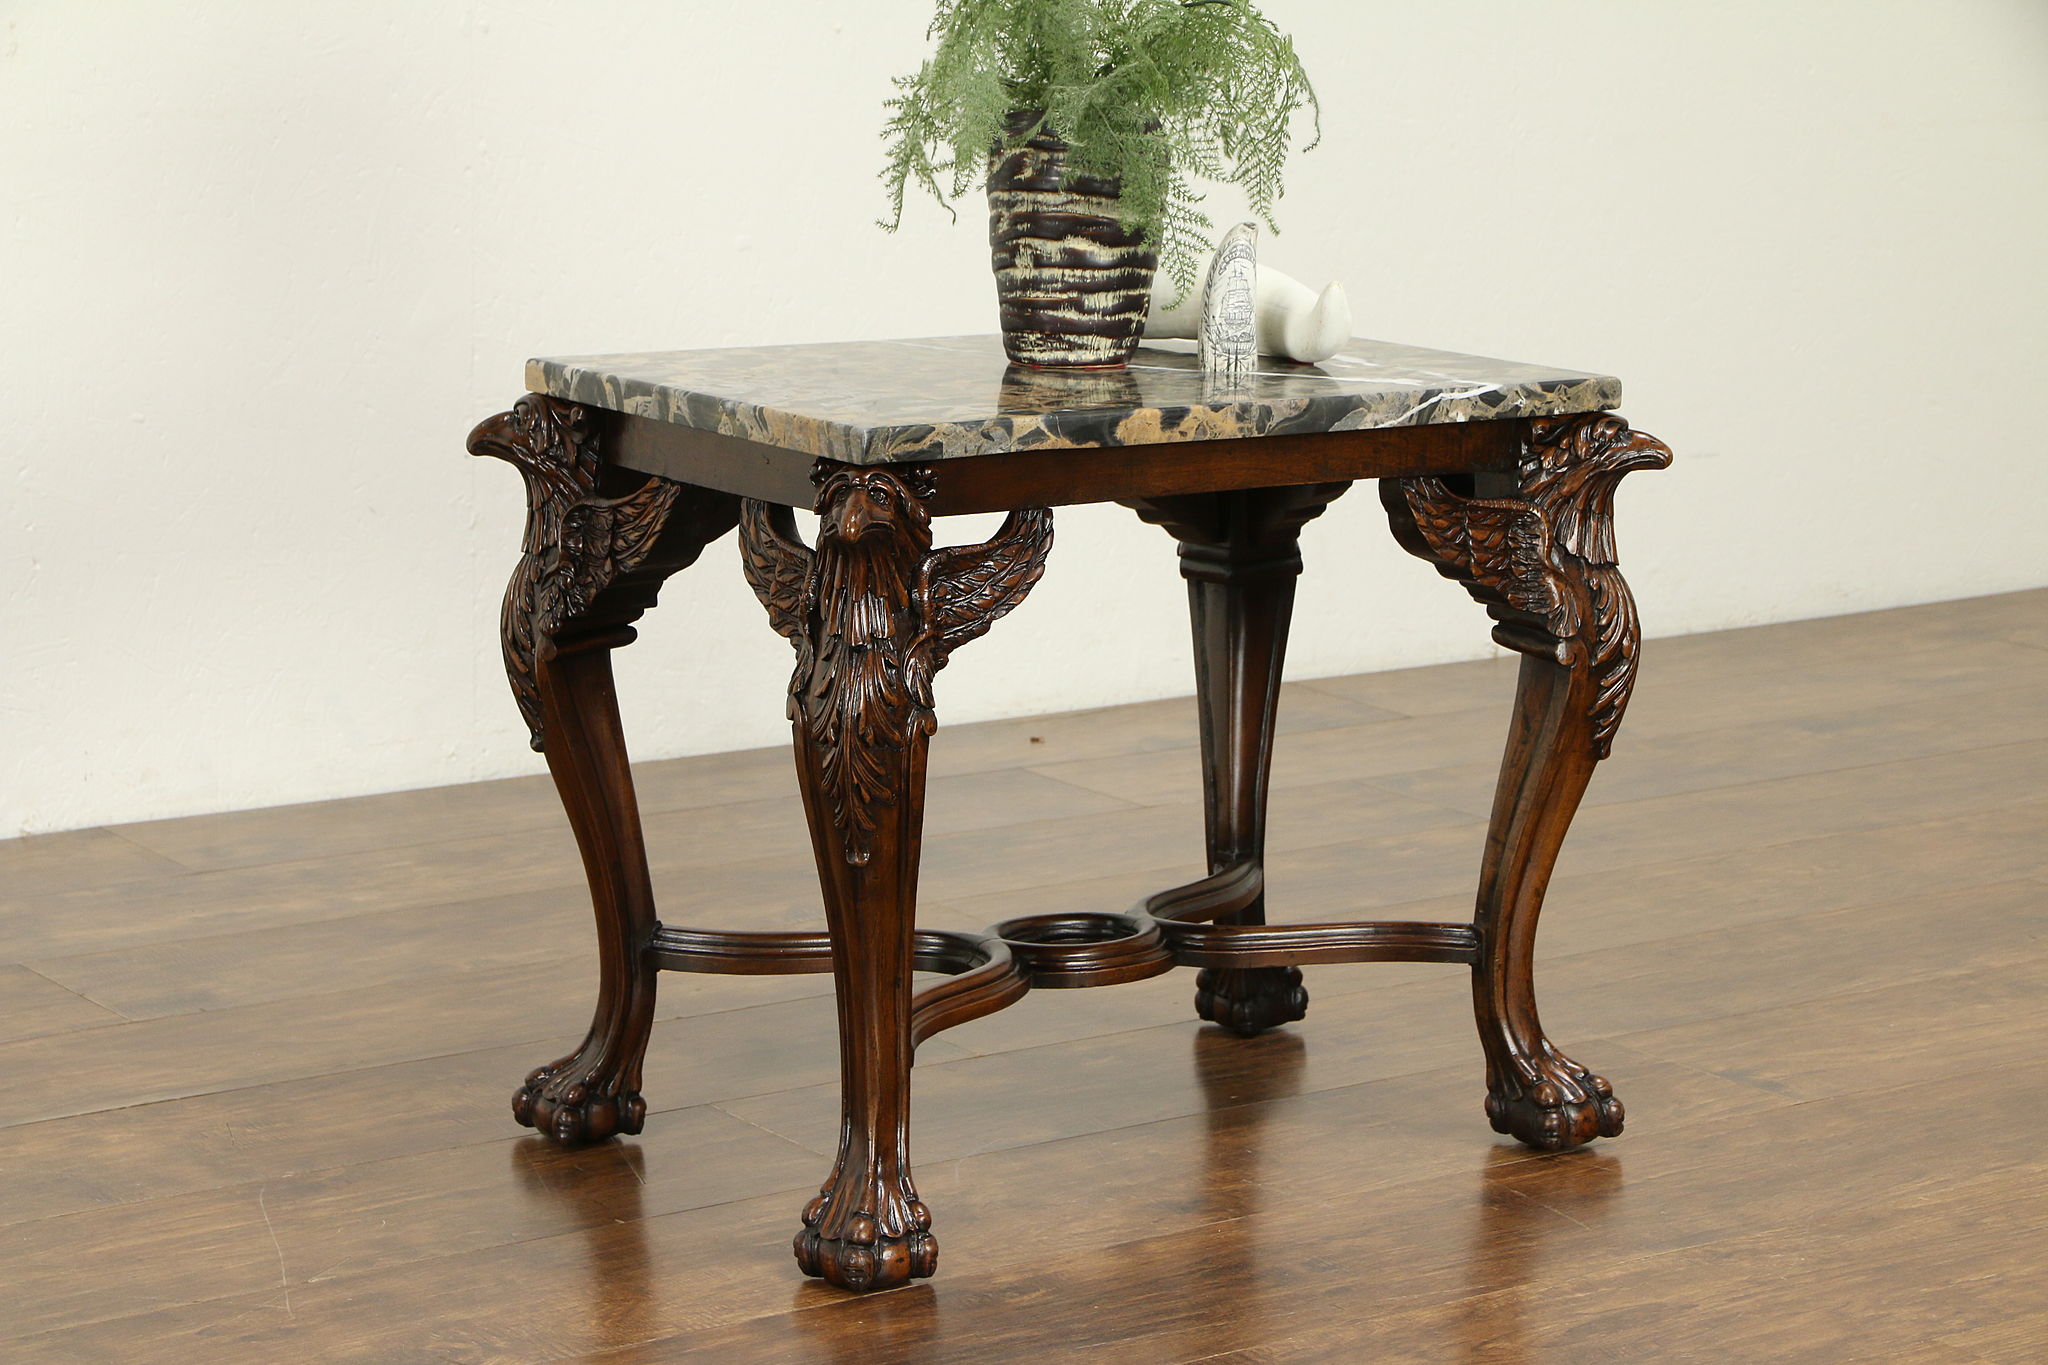 Sold Marble Top Antique Walnut Coffee Table Carved Eagle Legs 32567 Harp Gallery Antiques Furniture